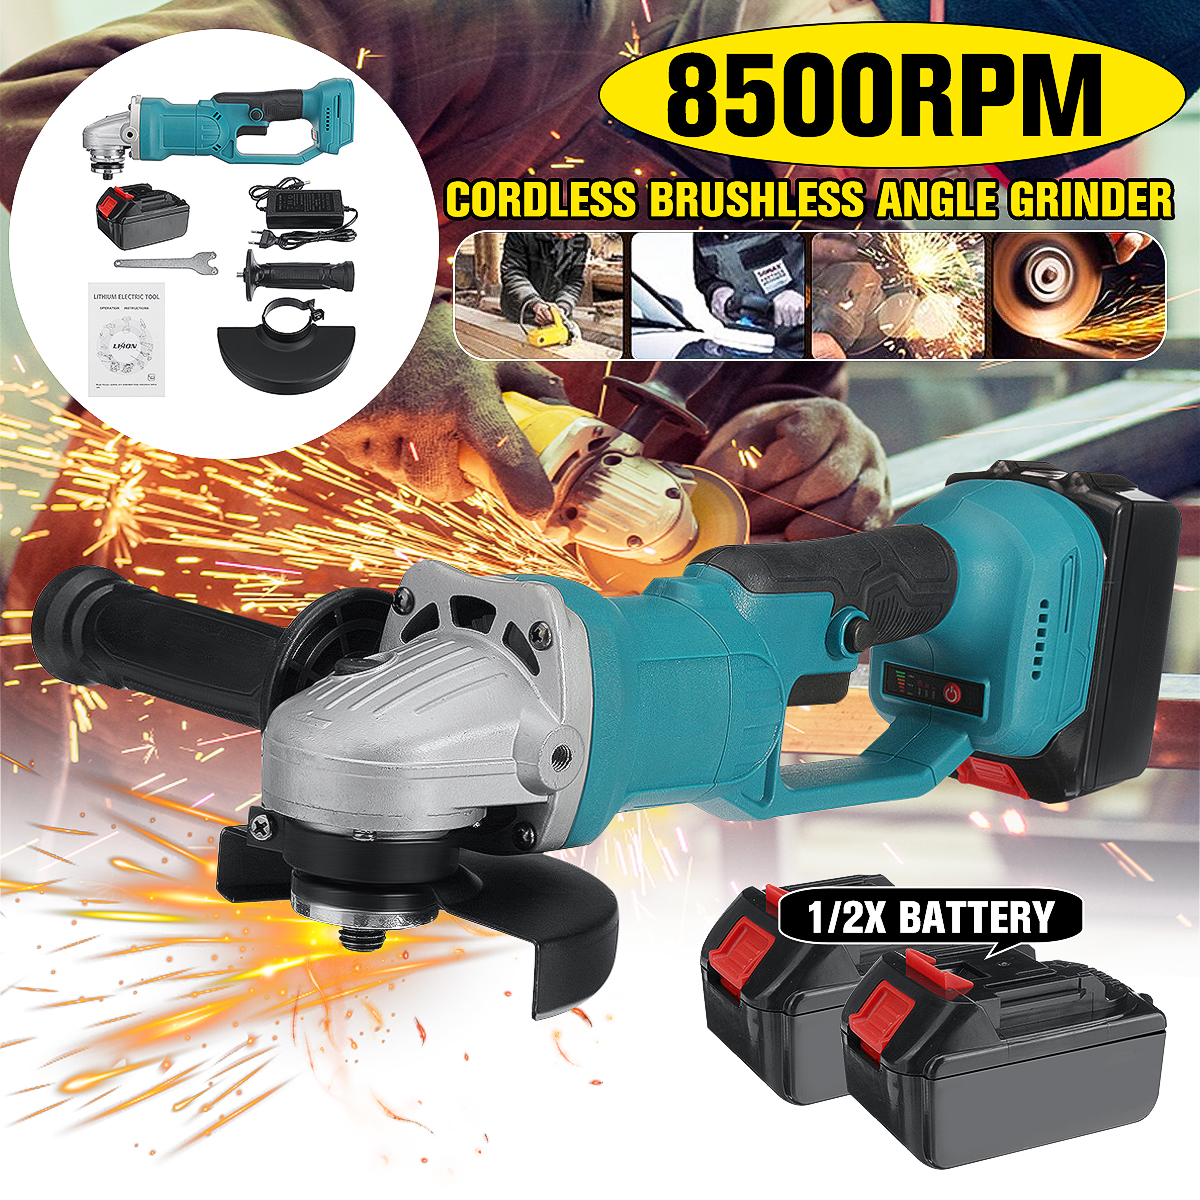 125mm-Brushless-Rechargable-Angle-Grinder-W-12-Battery-Metal-Stone-Wood-Plastic-Cutting-Polishing-To-1875442-2